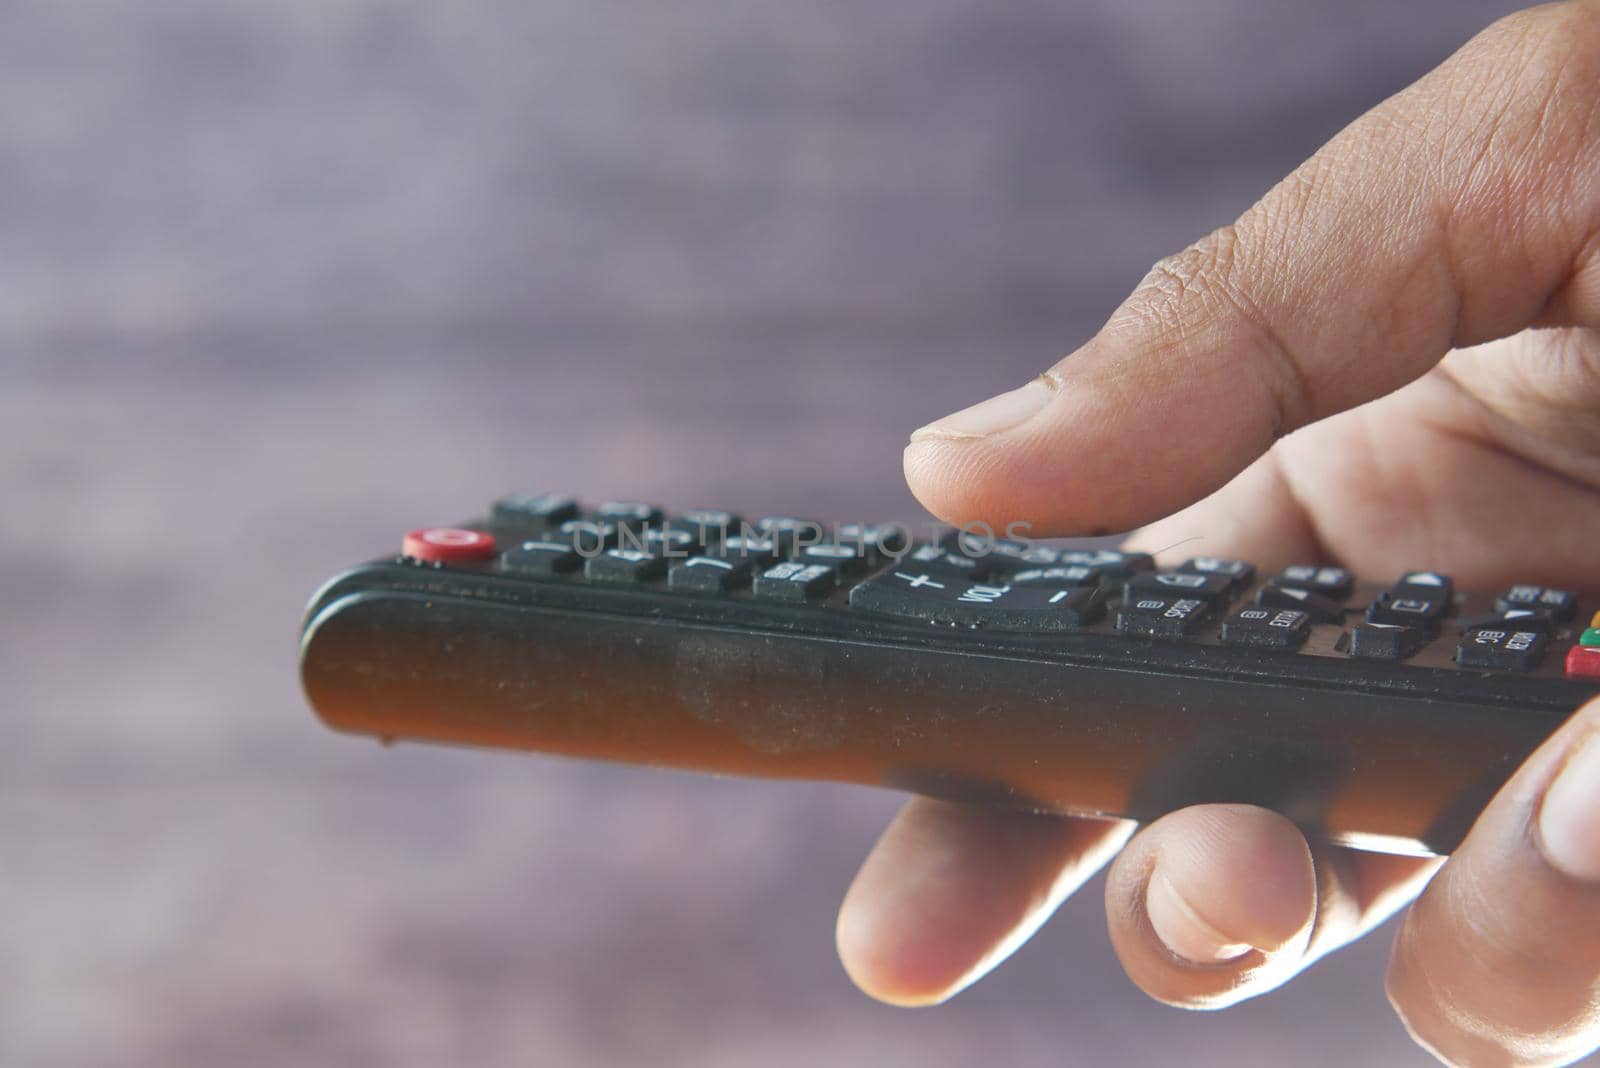 close up of man hand holding tv remote